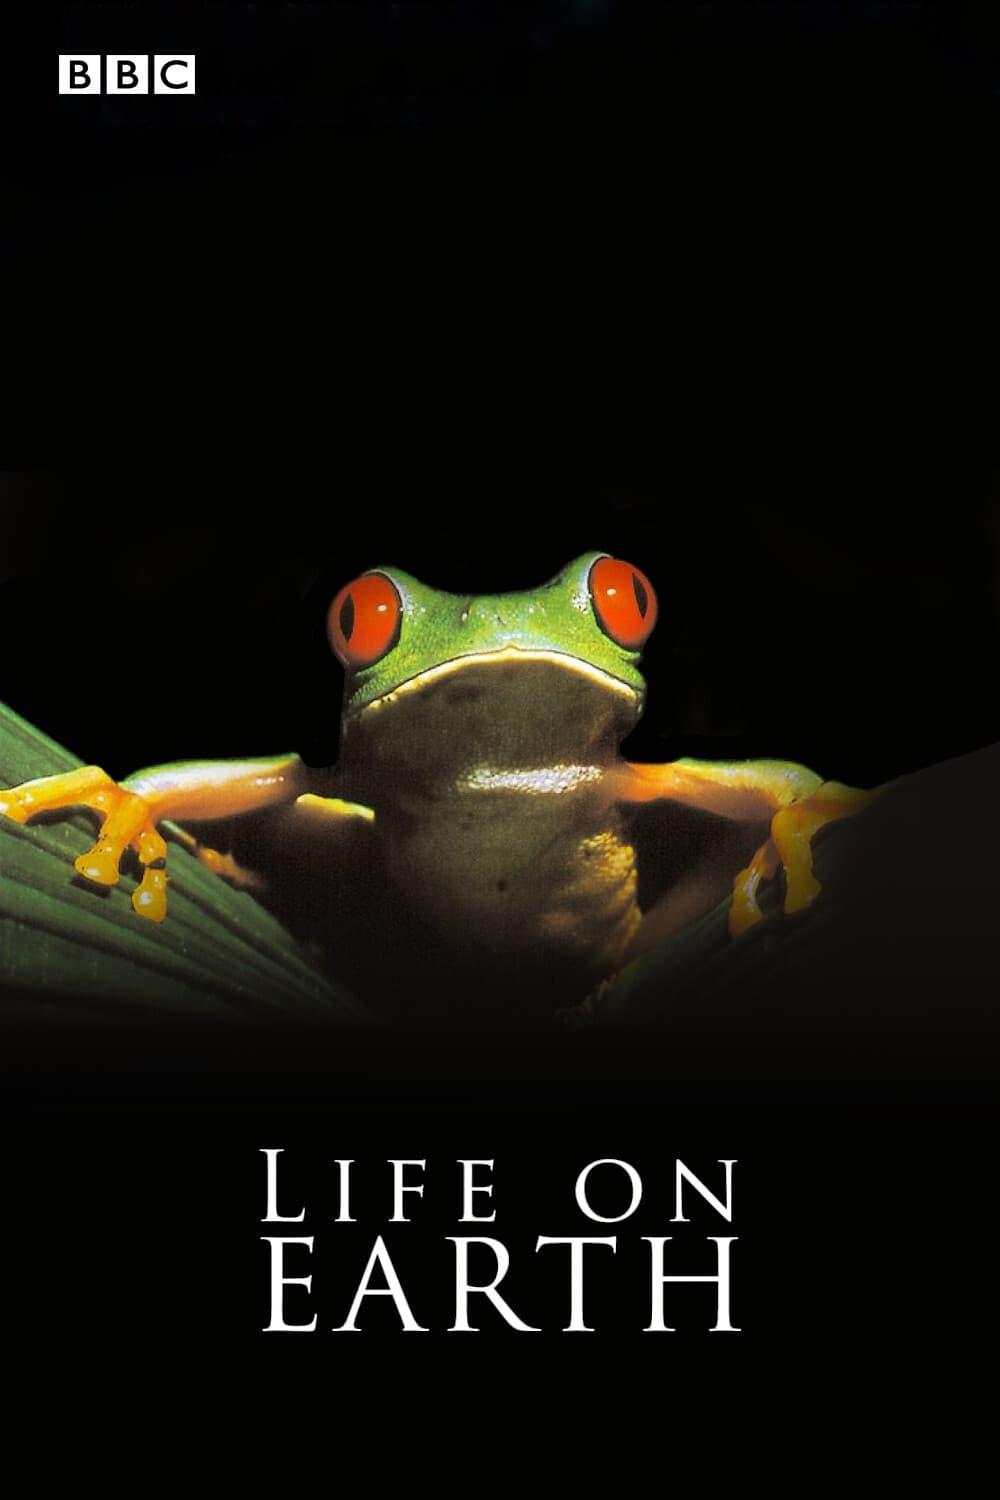 Life on Earth poster